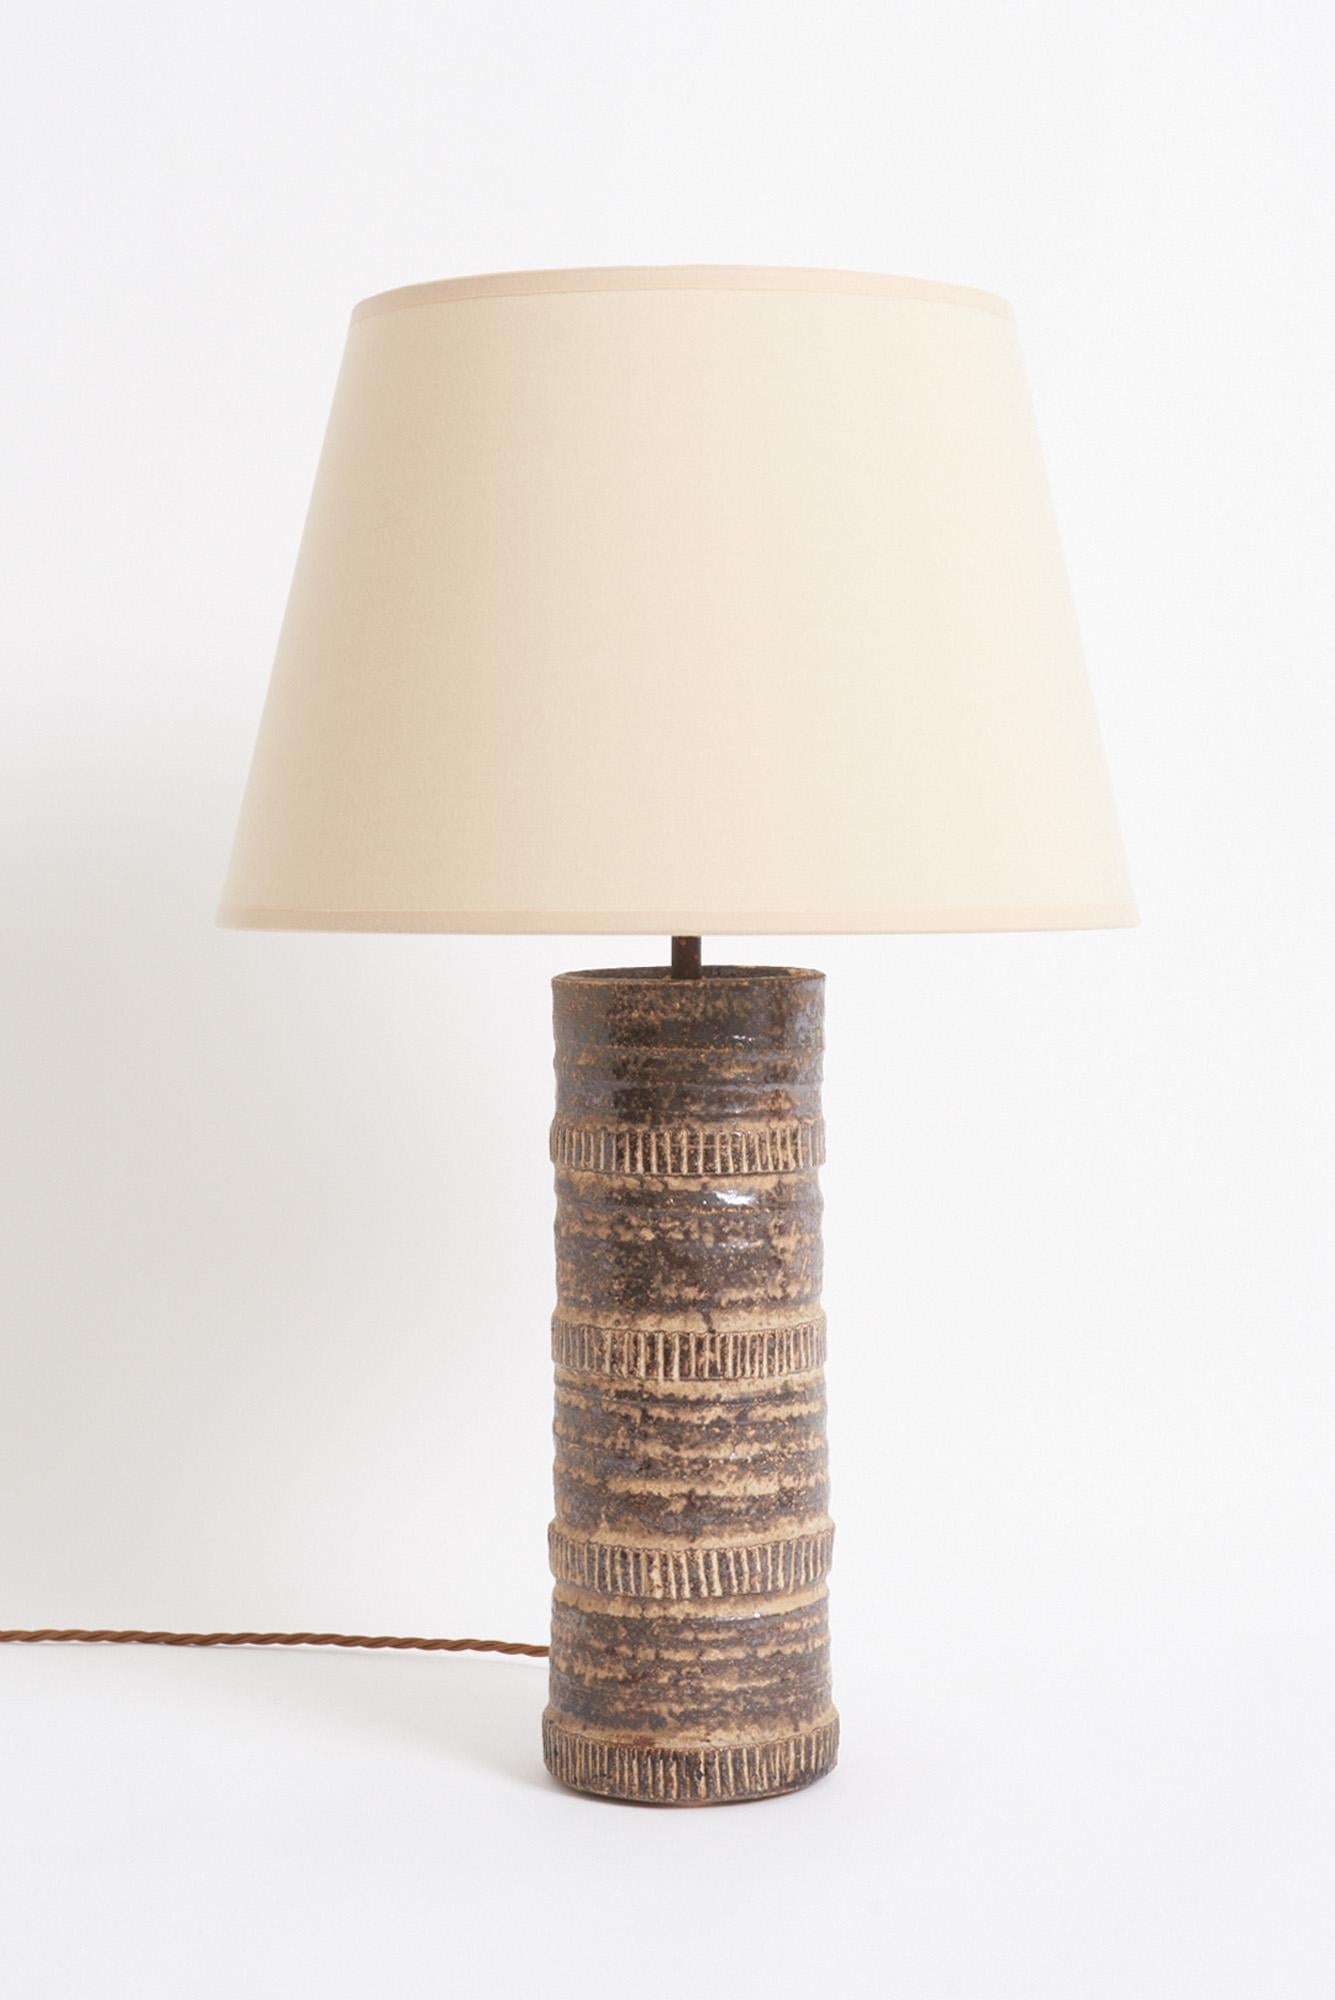 A textured ceramic table lamp
France, mid 20th Century
With the shade: 58 cm high by 35.5 cm diameter 
Lamp base only: 39.5 cm high by 11 cm diameter